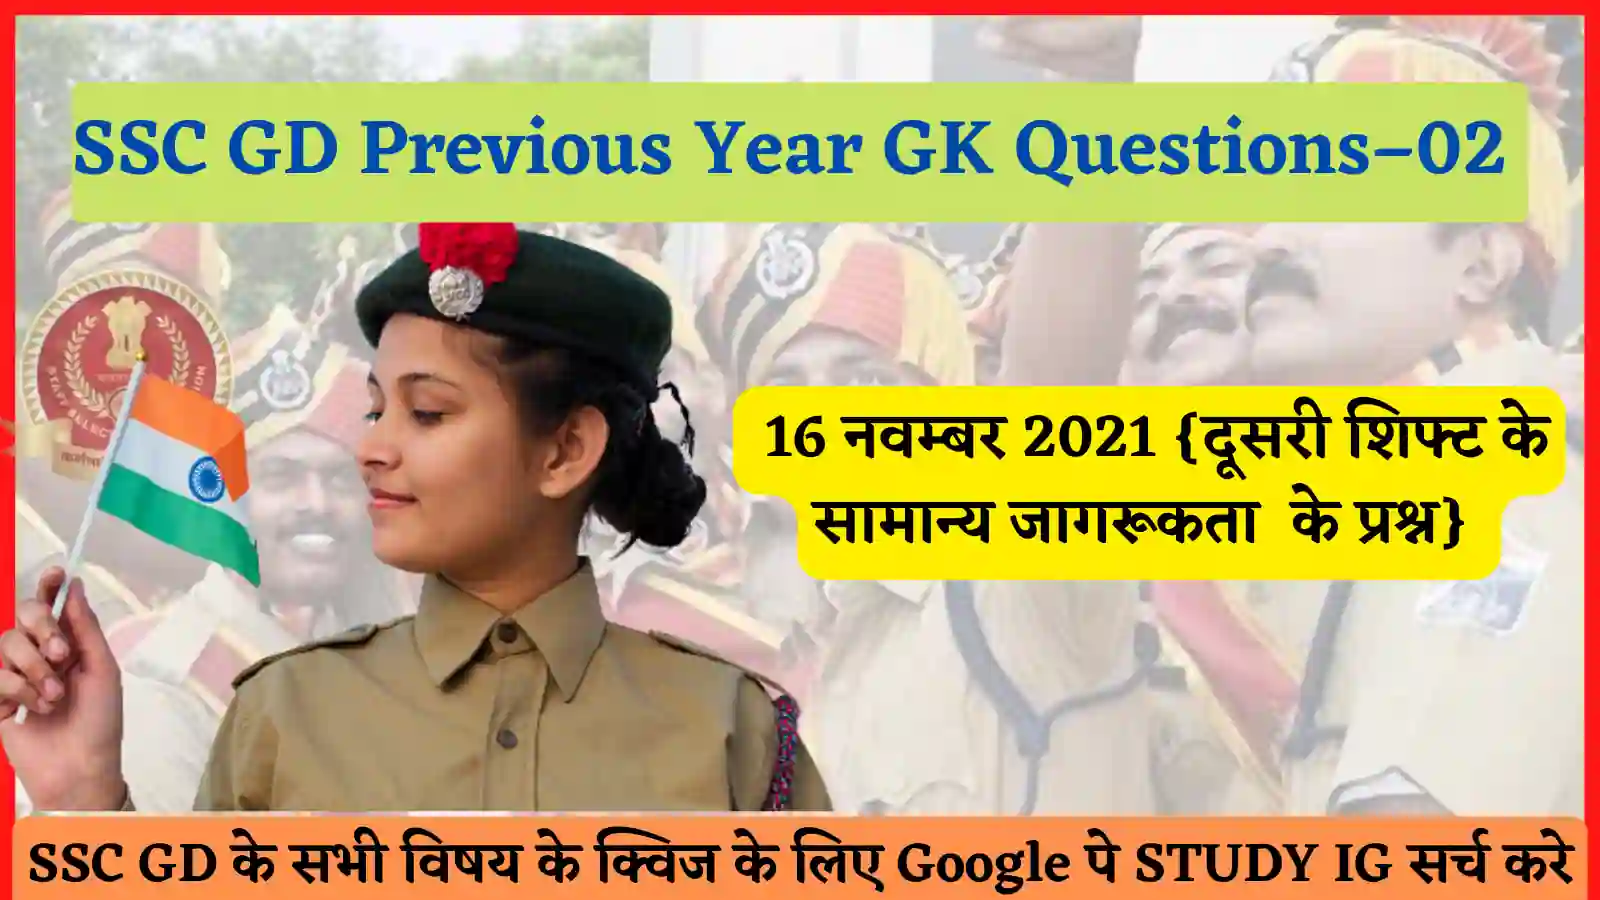 SSC GD Previous Year GK Questions–02 